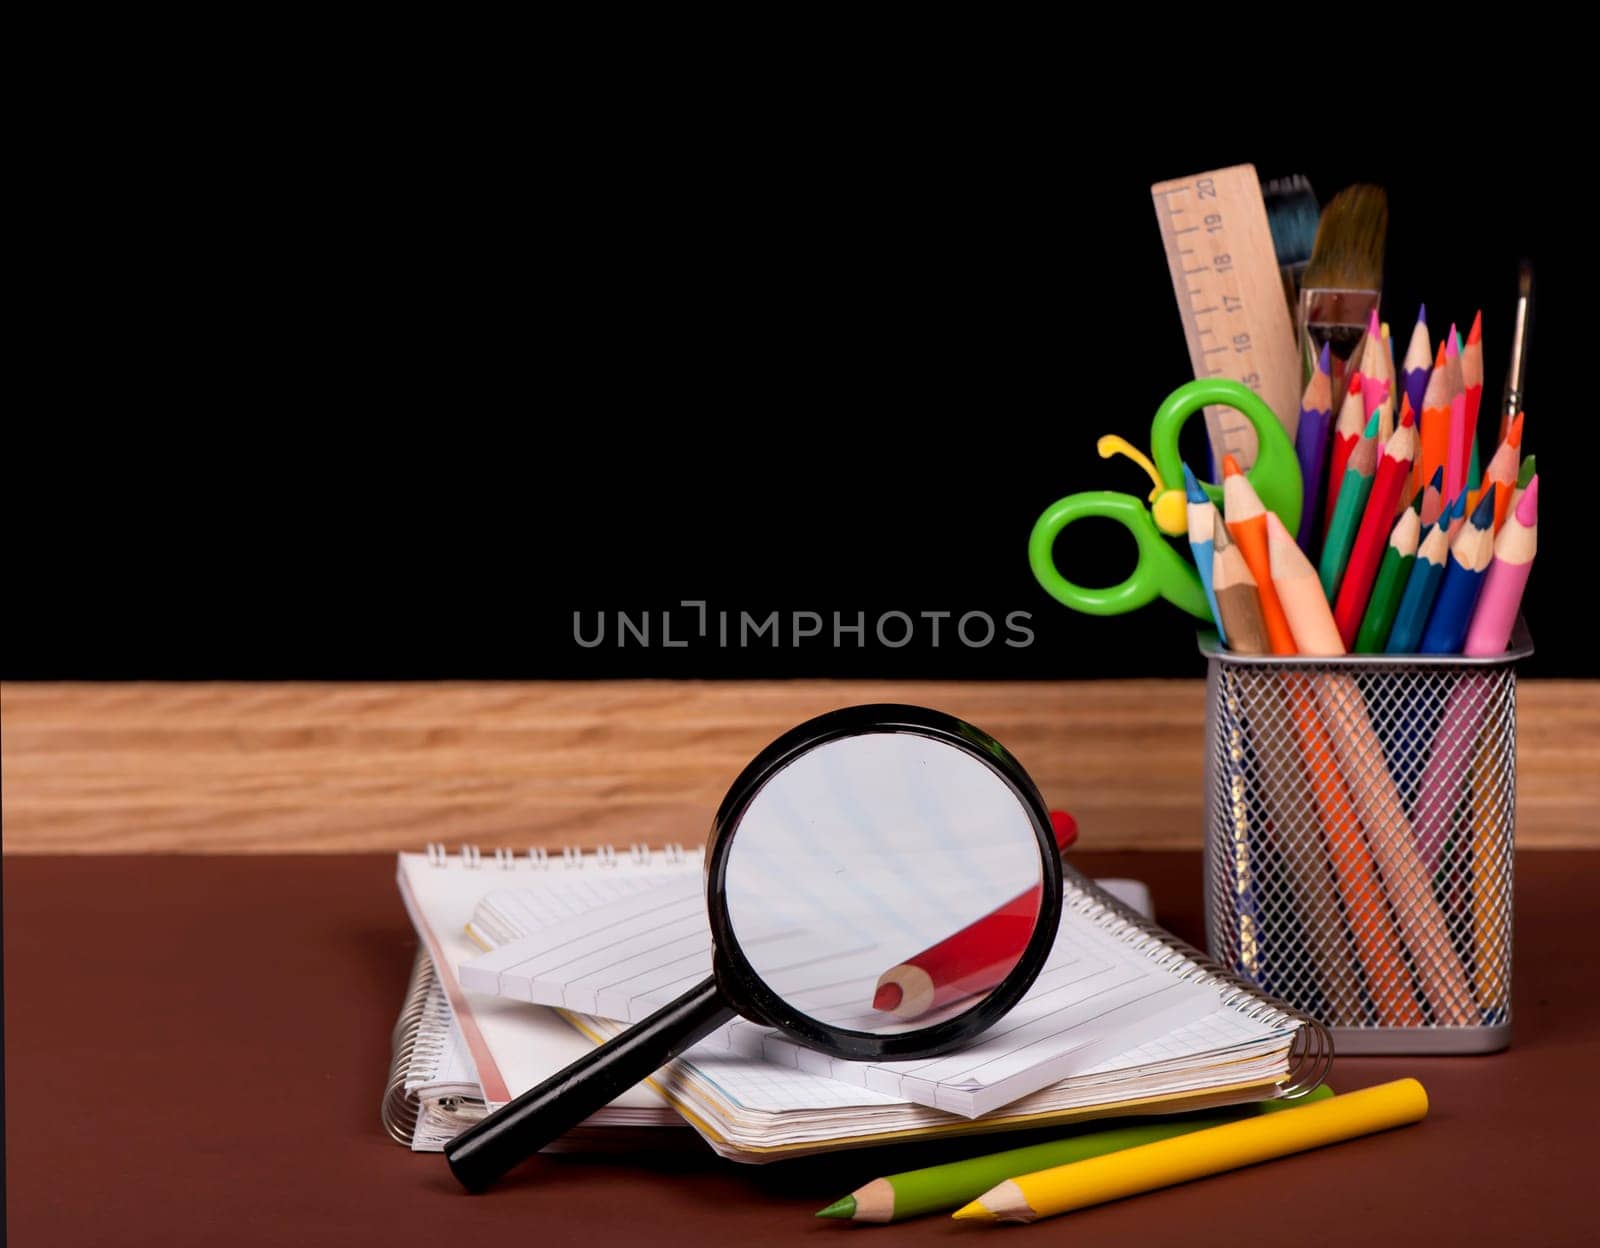 Magnifying glass, scissors, colored paper, textbooksboard, books, pencils, opened empty notebook against a dark background by aprilphoto